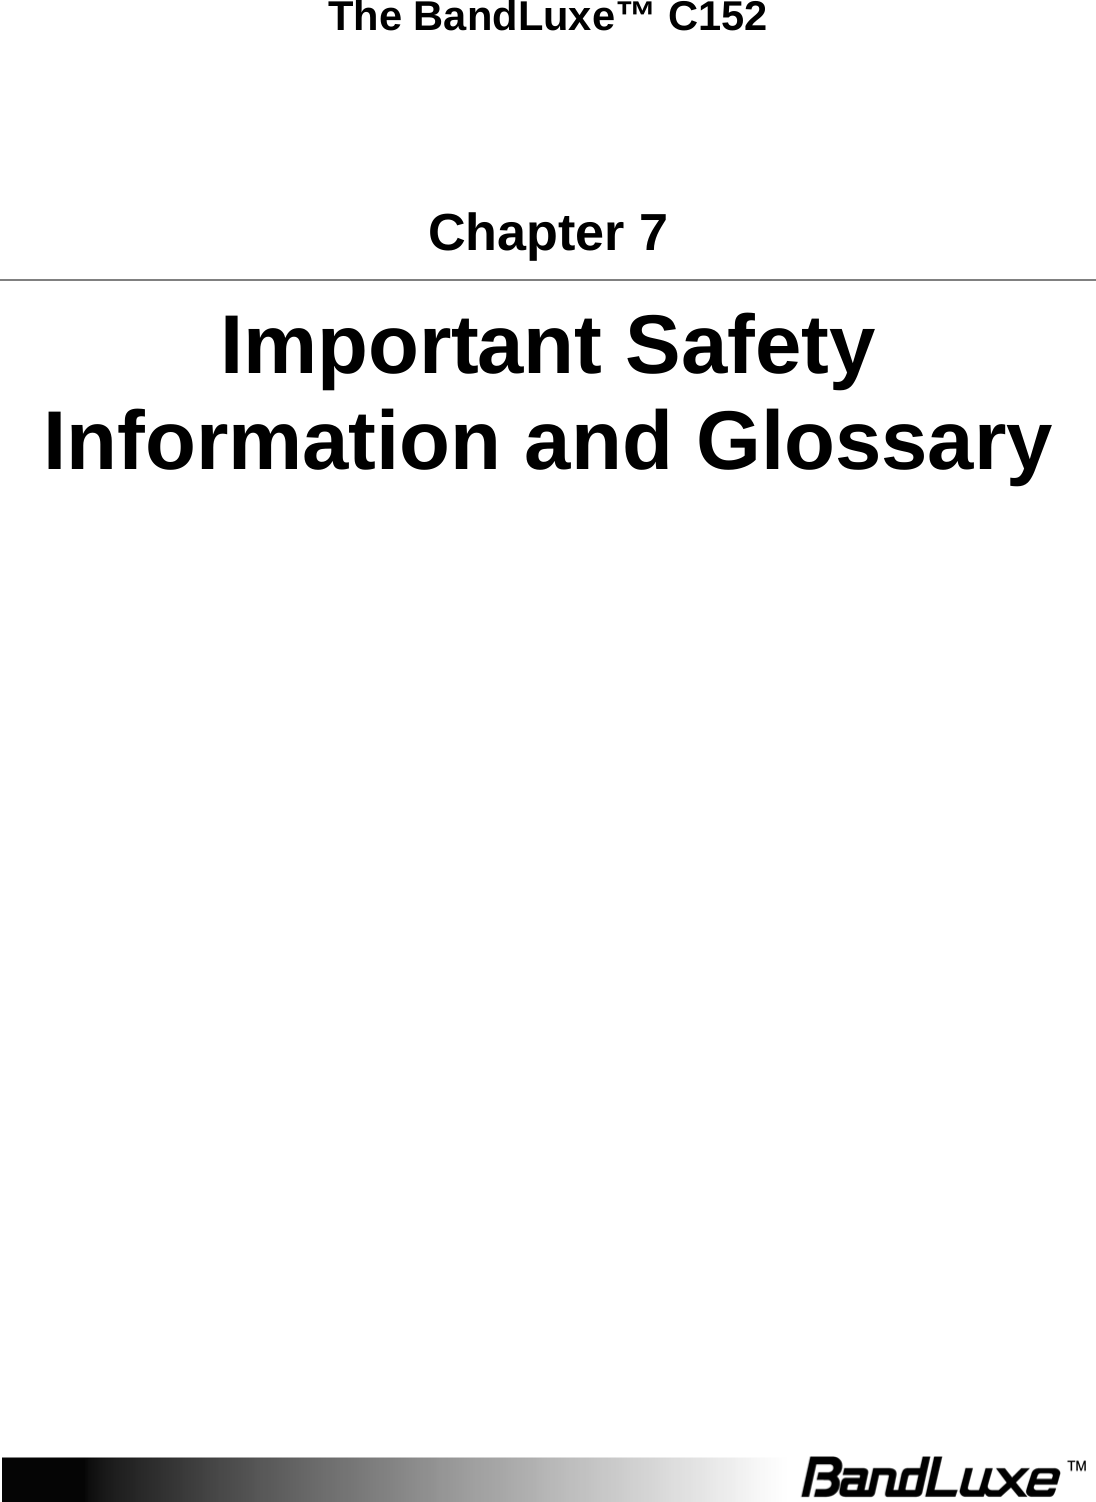   The BandLuxe™ C152 Chapter 7 Important Safety Information and Glossary  